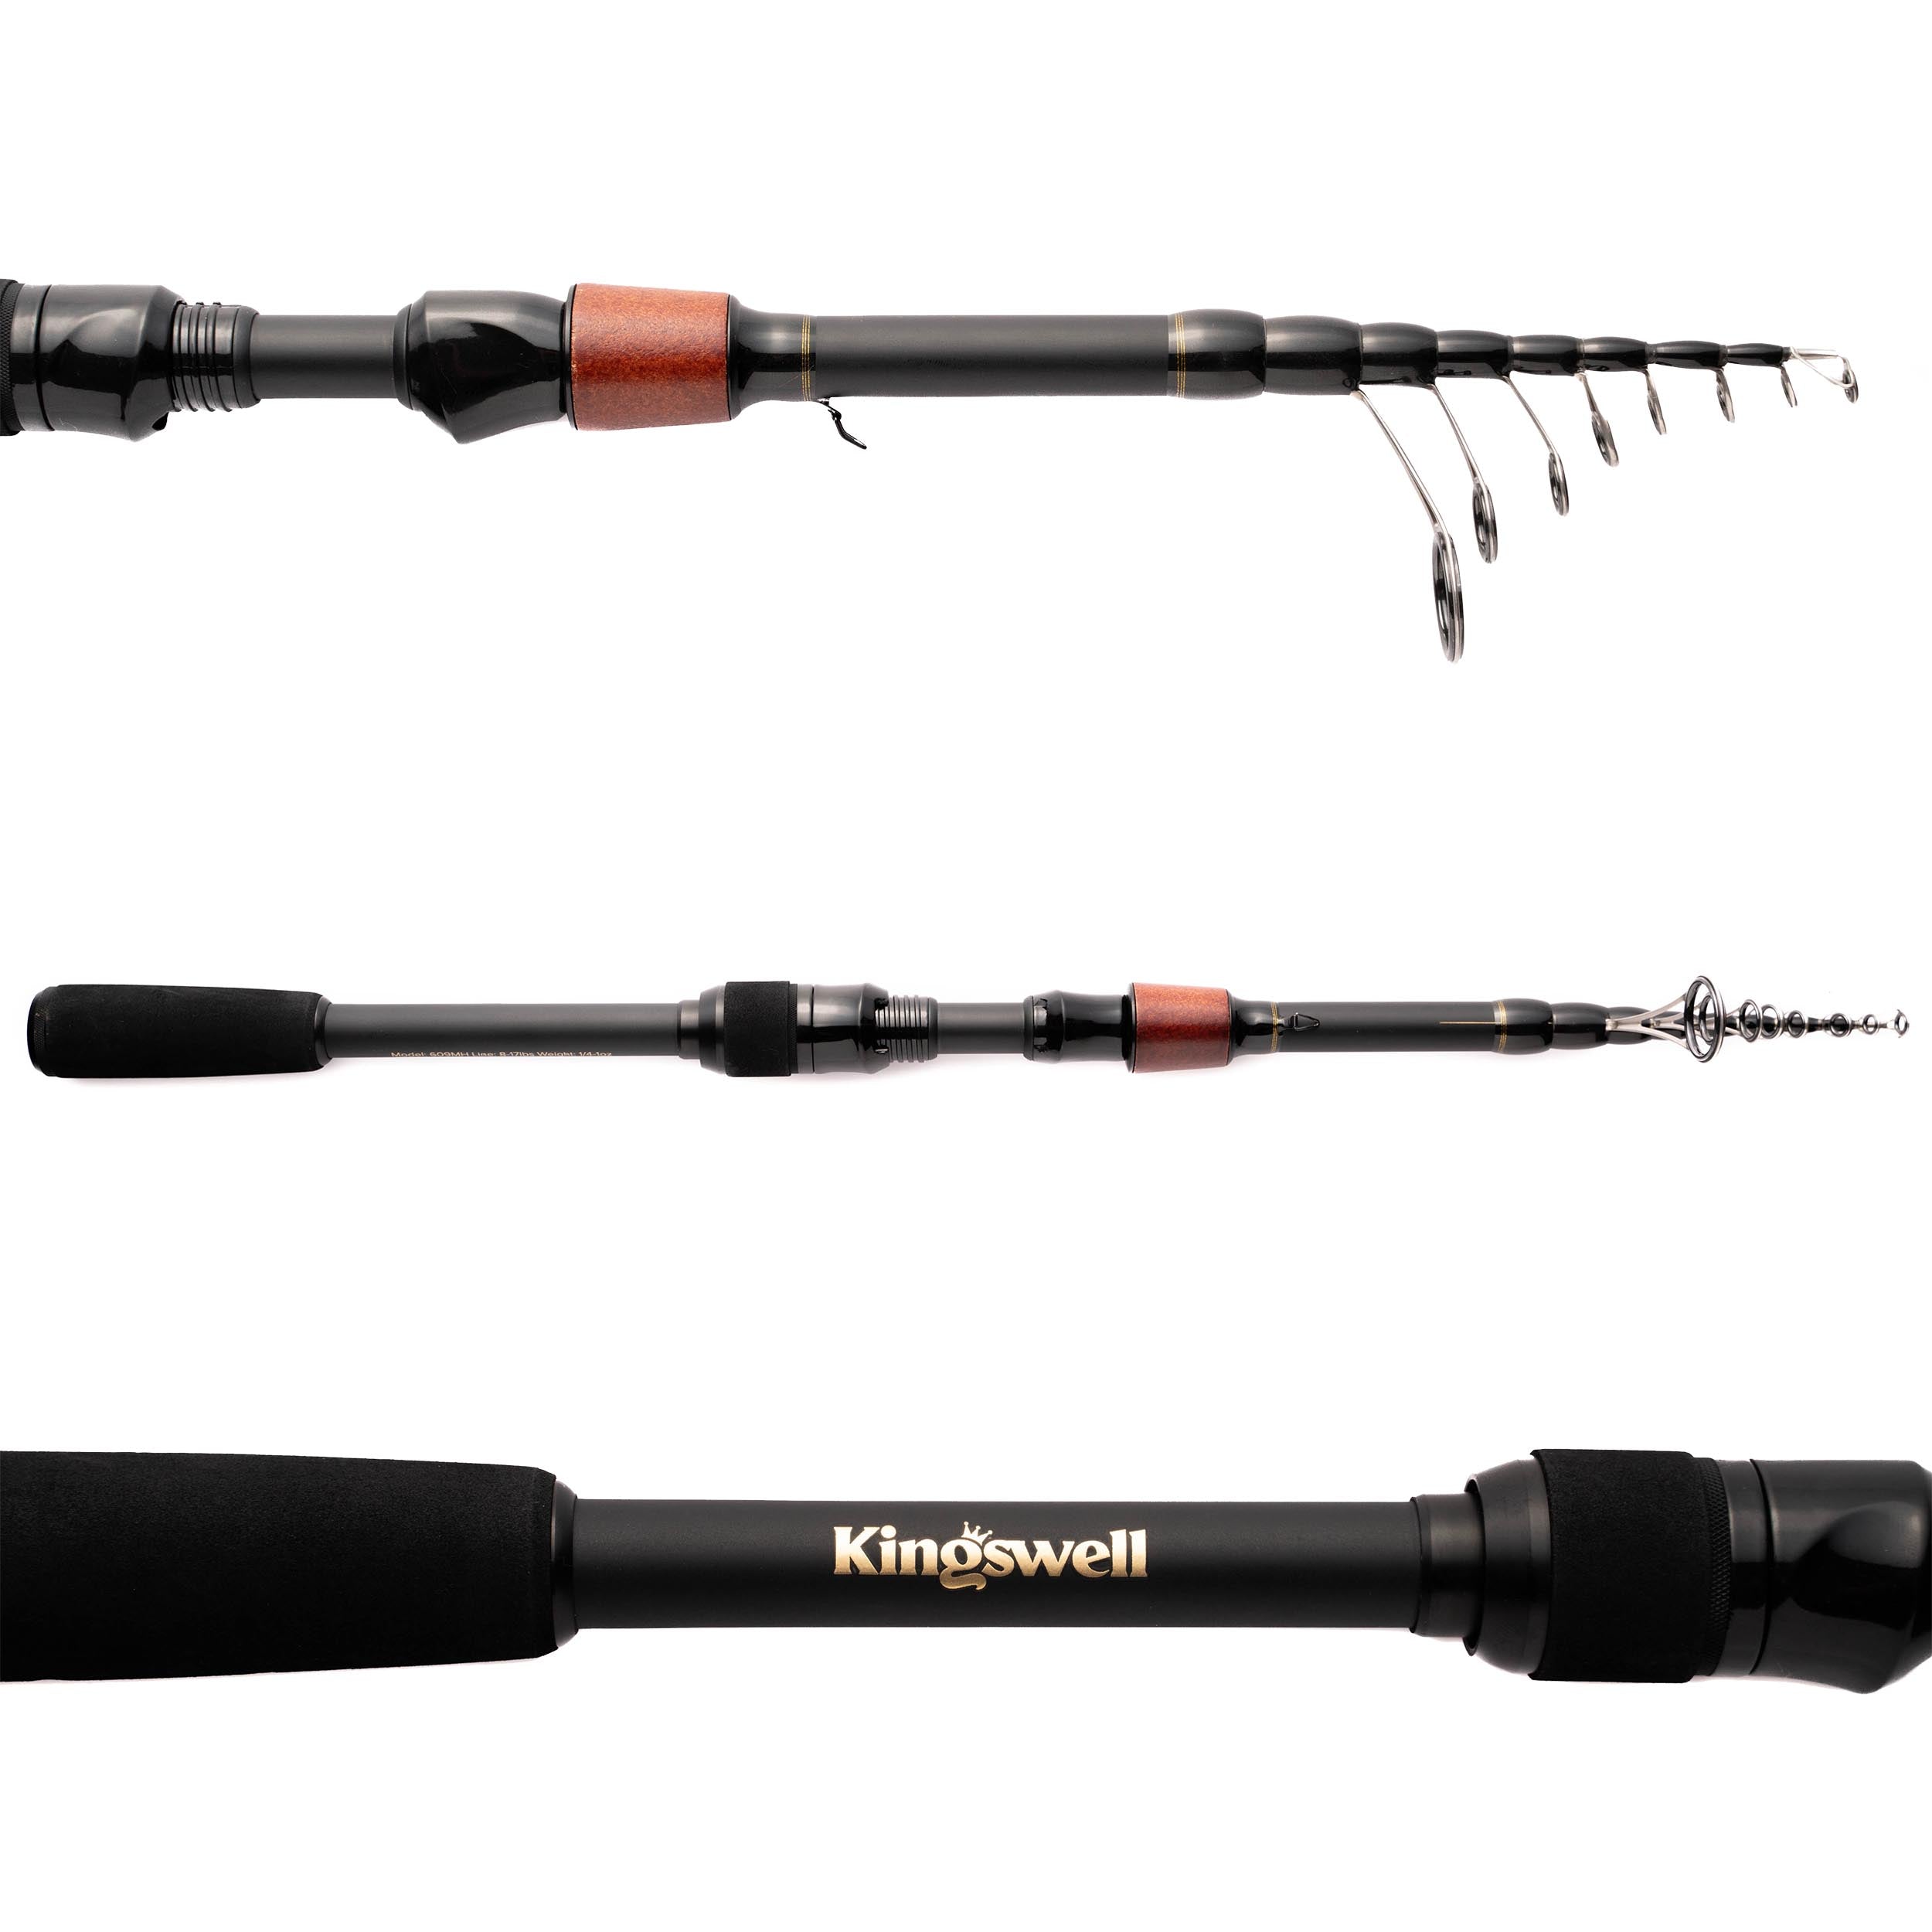 Kingswell KINgSWELL Telescopic Fishing Rod and Reel combo, Premium graphite  carbon collapsible Fishing Pole with Spinning Reel, Portable T